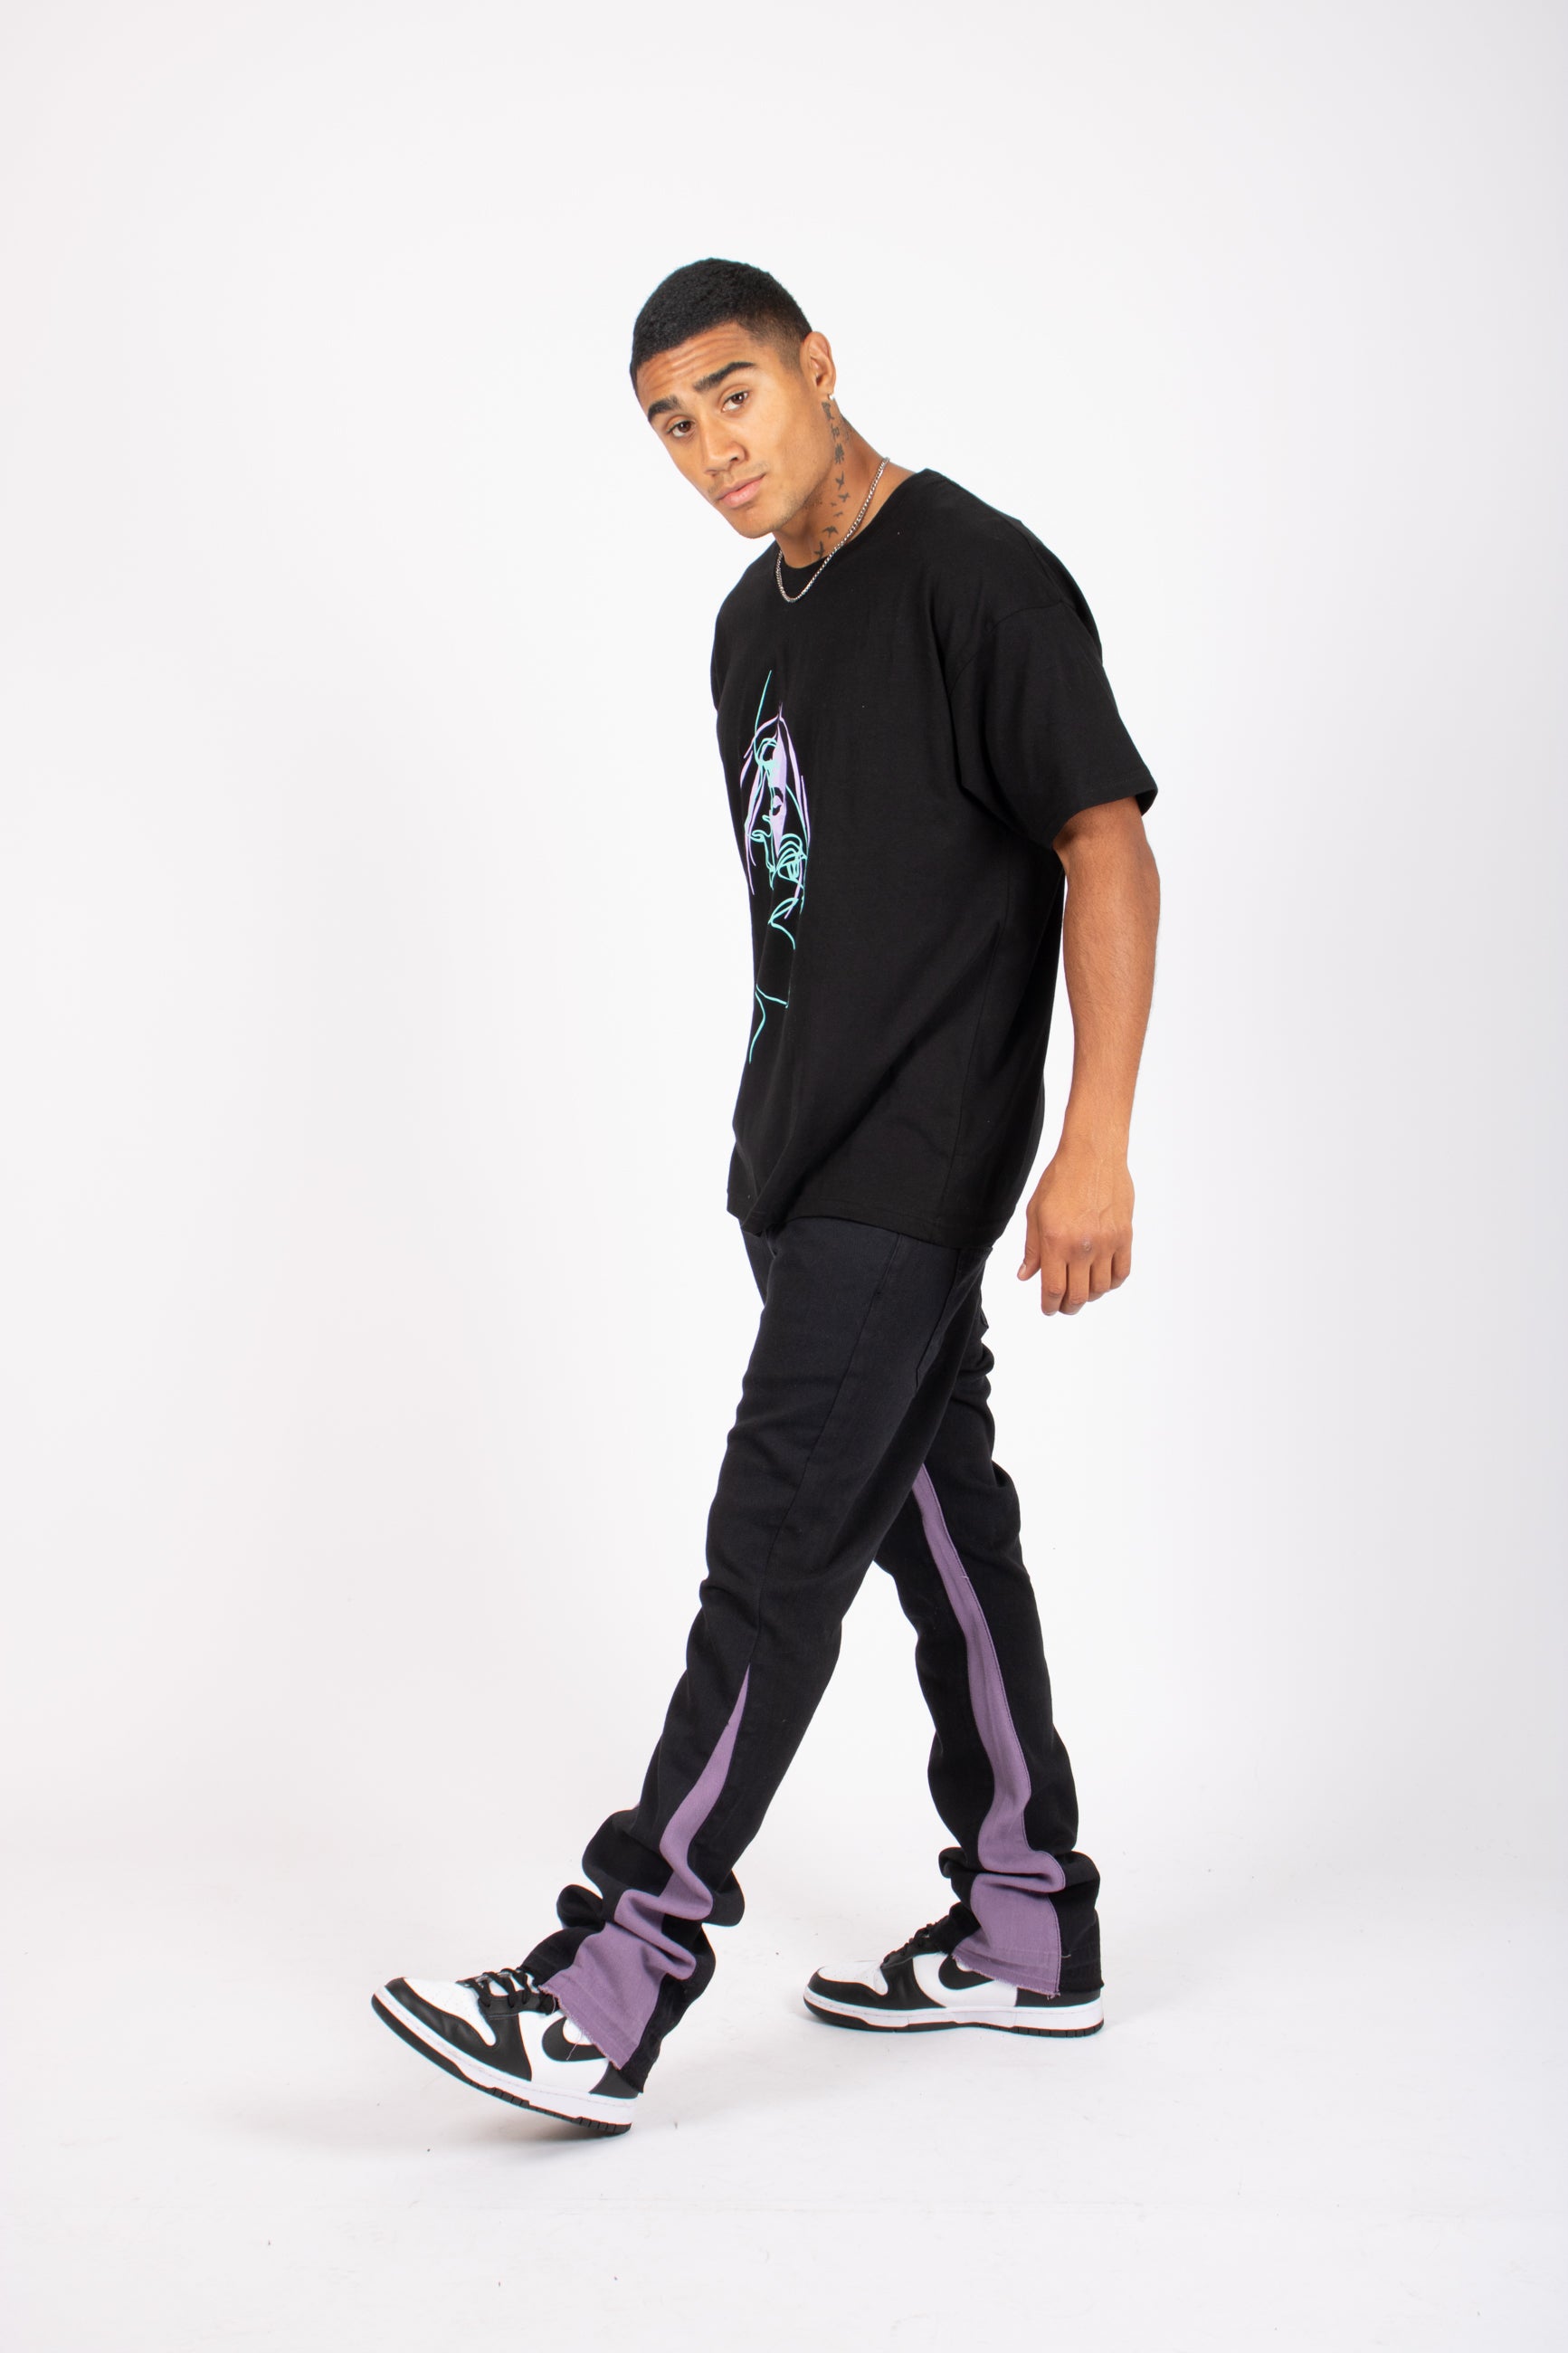 Straight Leg Spliced Jean in Black and Lilac